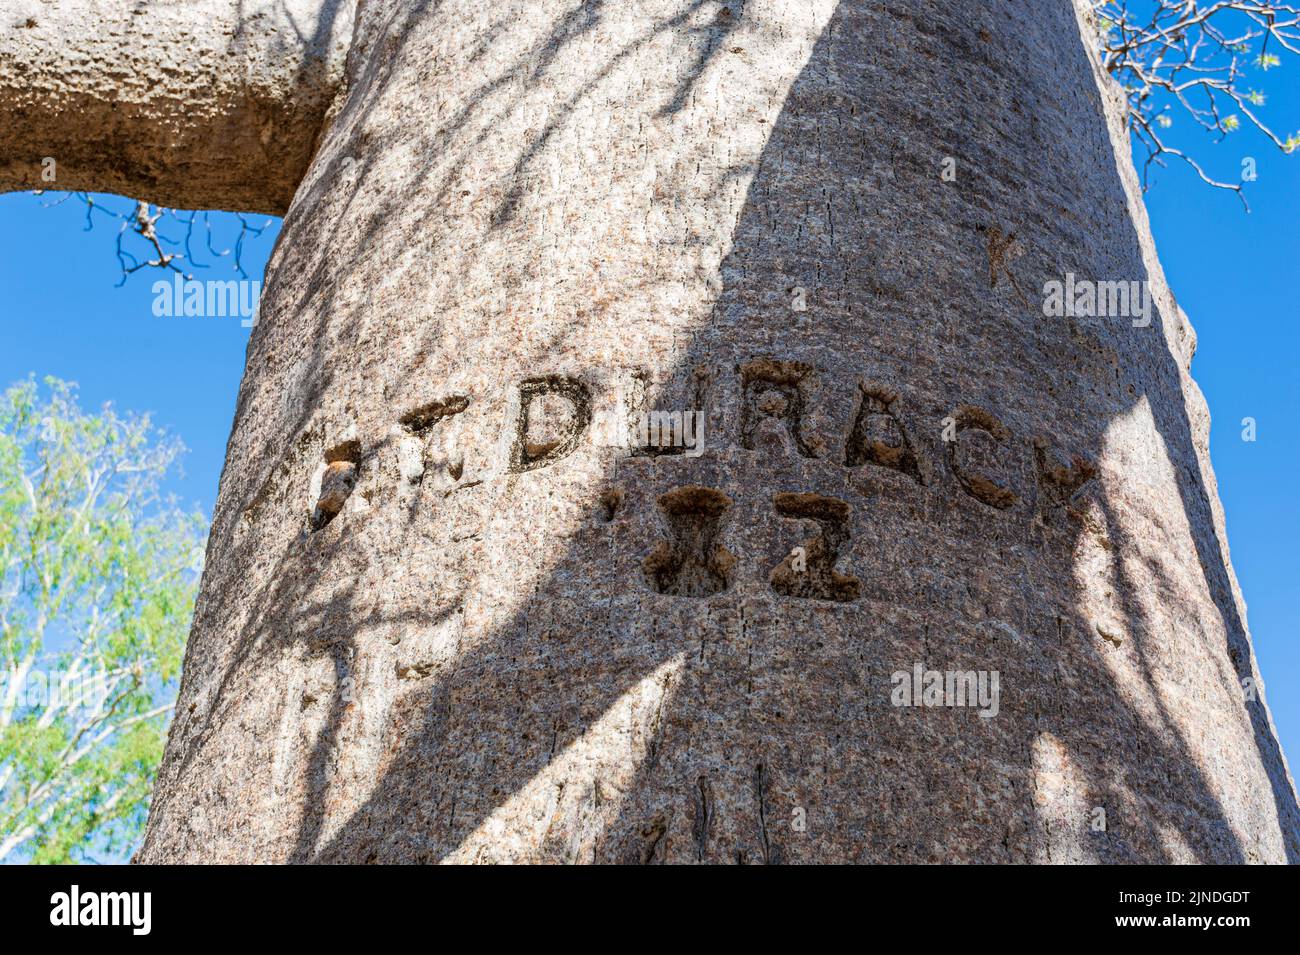 Boab with the name Durack engraved at the historic Bullita Homestead, Judbarra/Gregory National Park, Northern Territory, NT, Australia Stock Photo